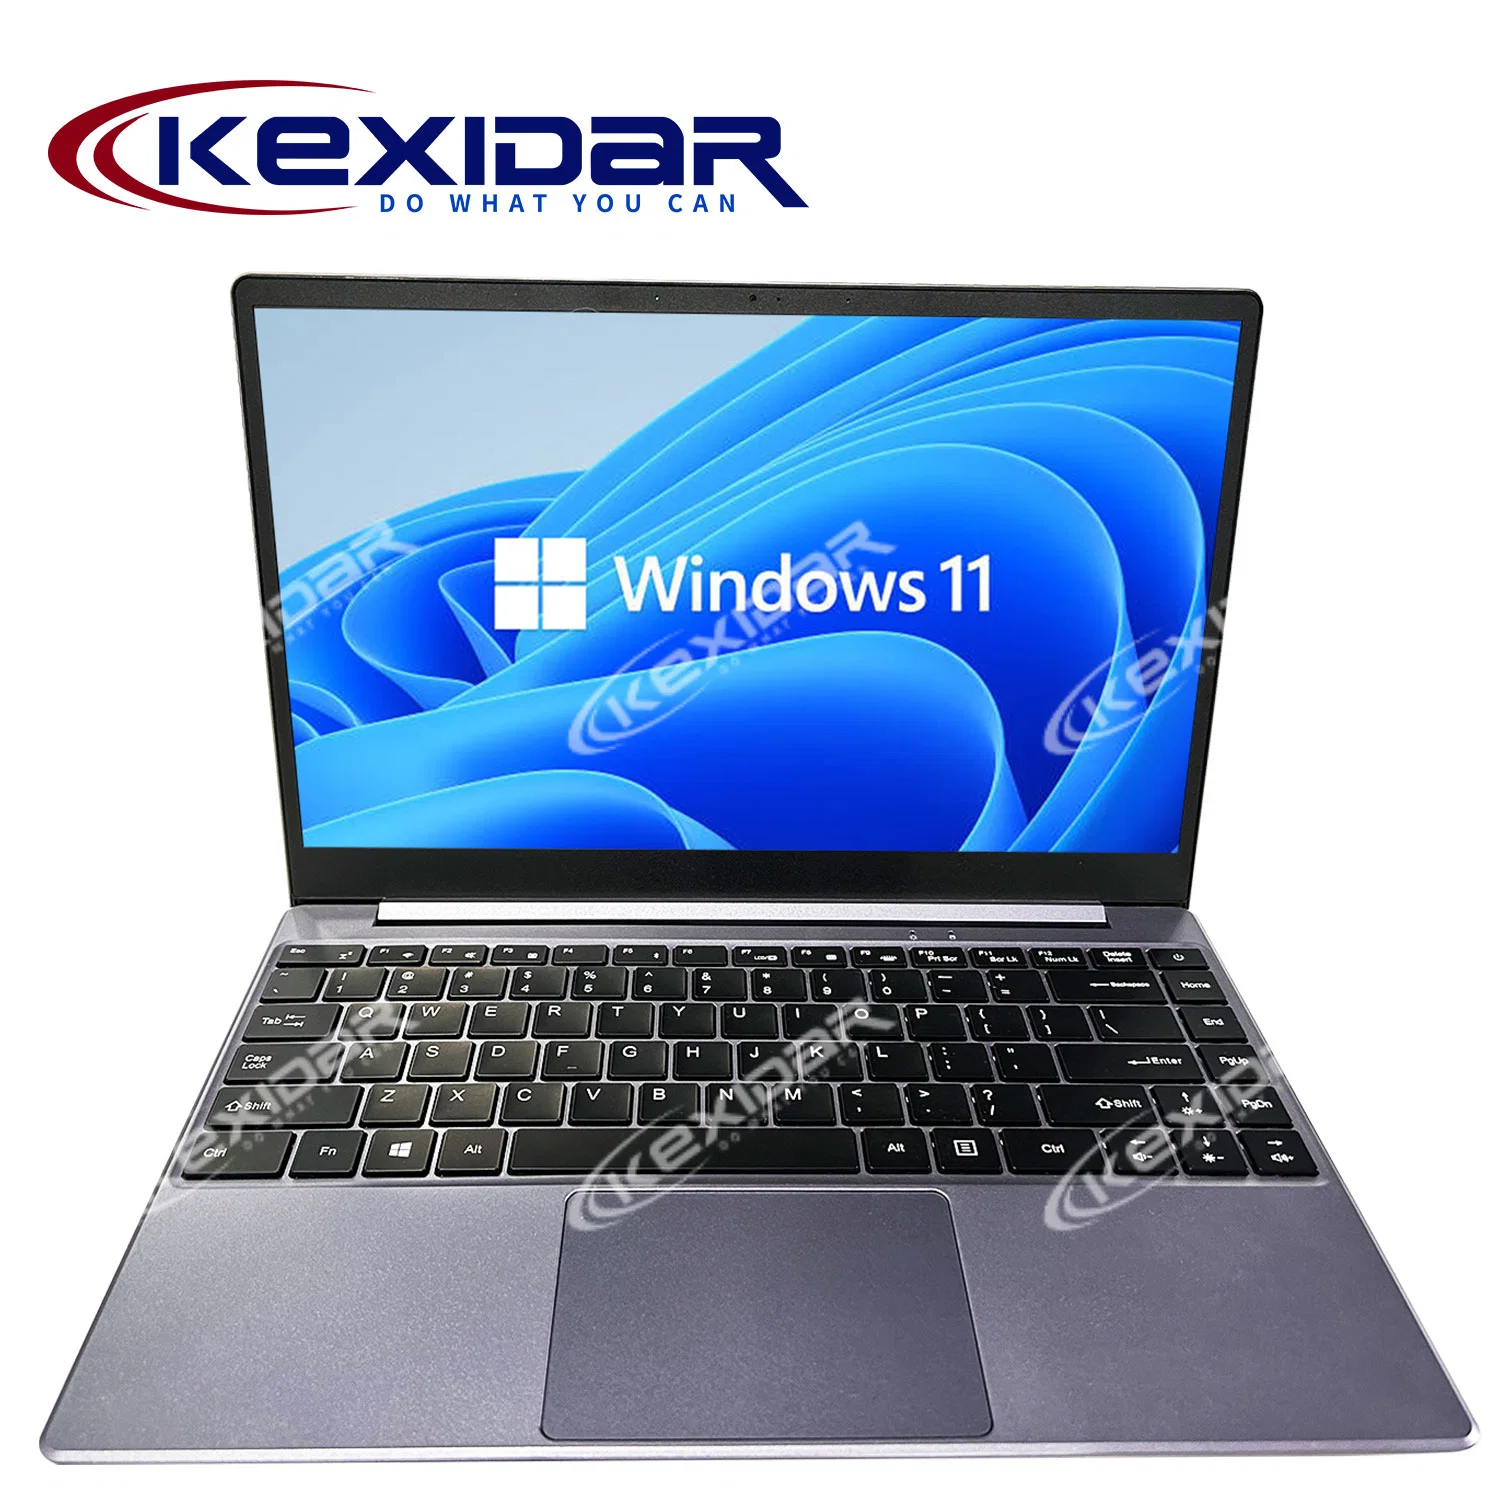 Cheap Intel GPU Core I5 14.1 Inch Laptop with WiFi for Business